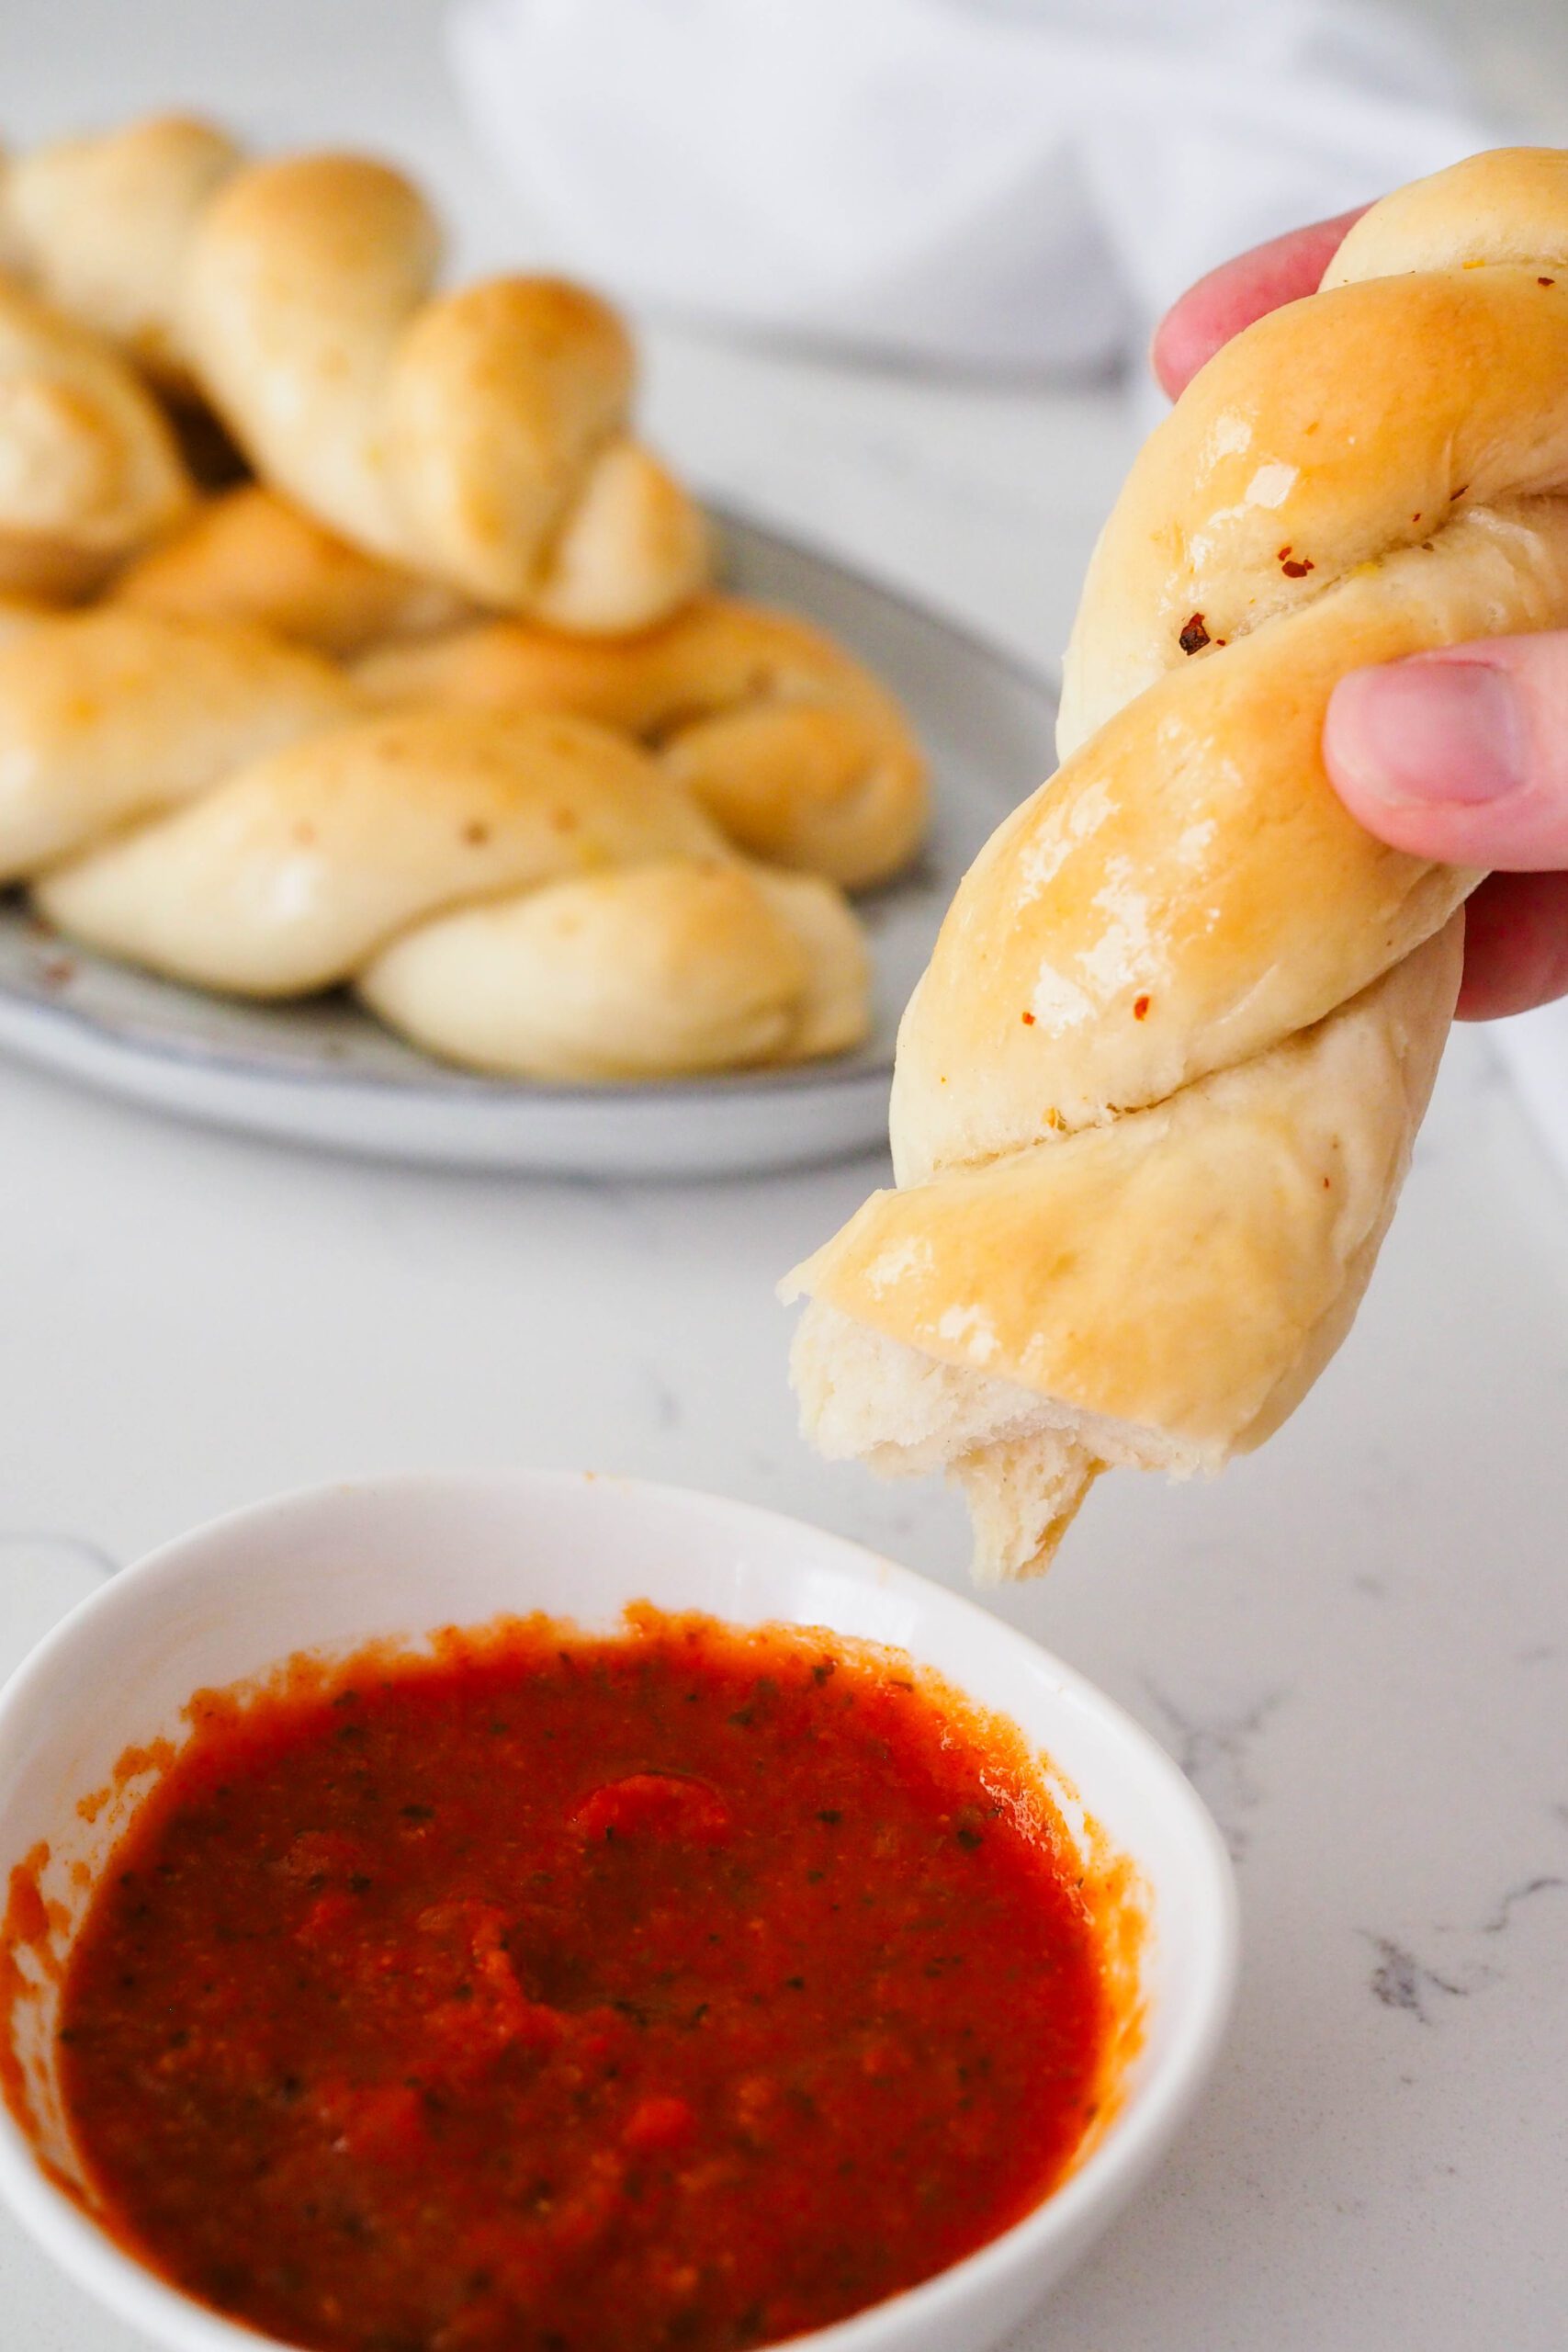 Half of a twisted garlic breadstick is dipped into marinara sauce.